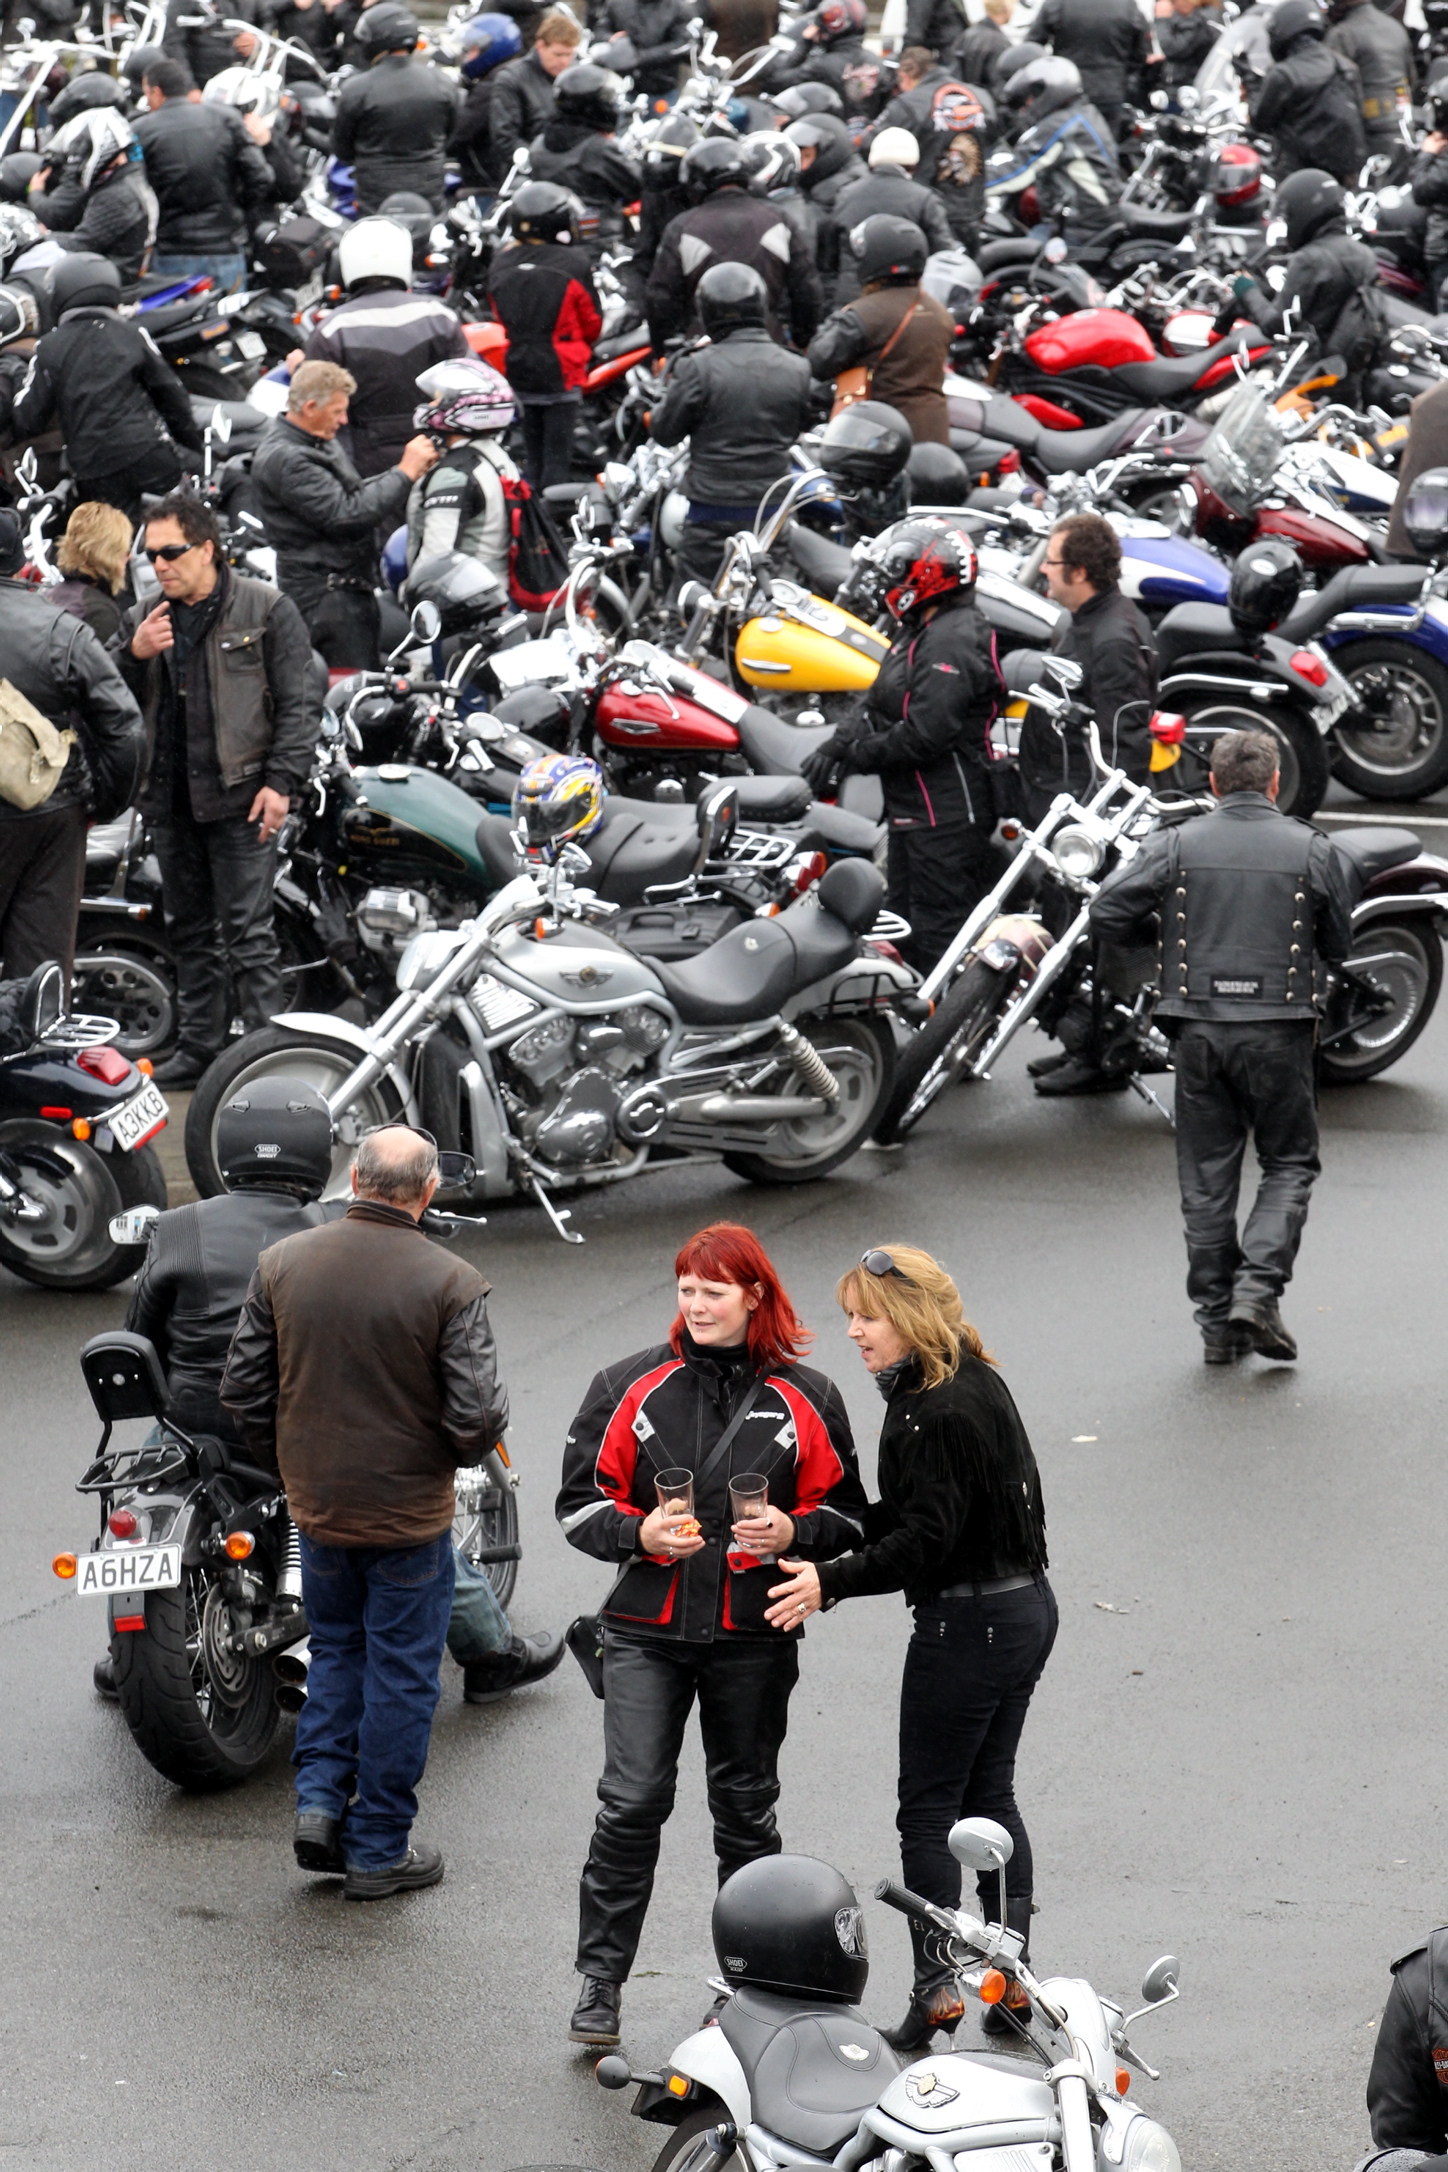 While biker clubs are often involved in charity events, it is their scrapes with the law that define them. "When we do right nobody remembers, when we do wrong nobody forgets" is a refrain often used by Hells Angels. Photo / Paul Taylor